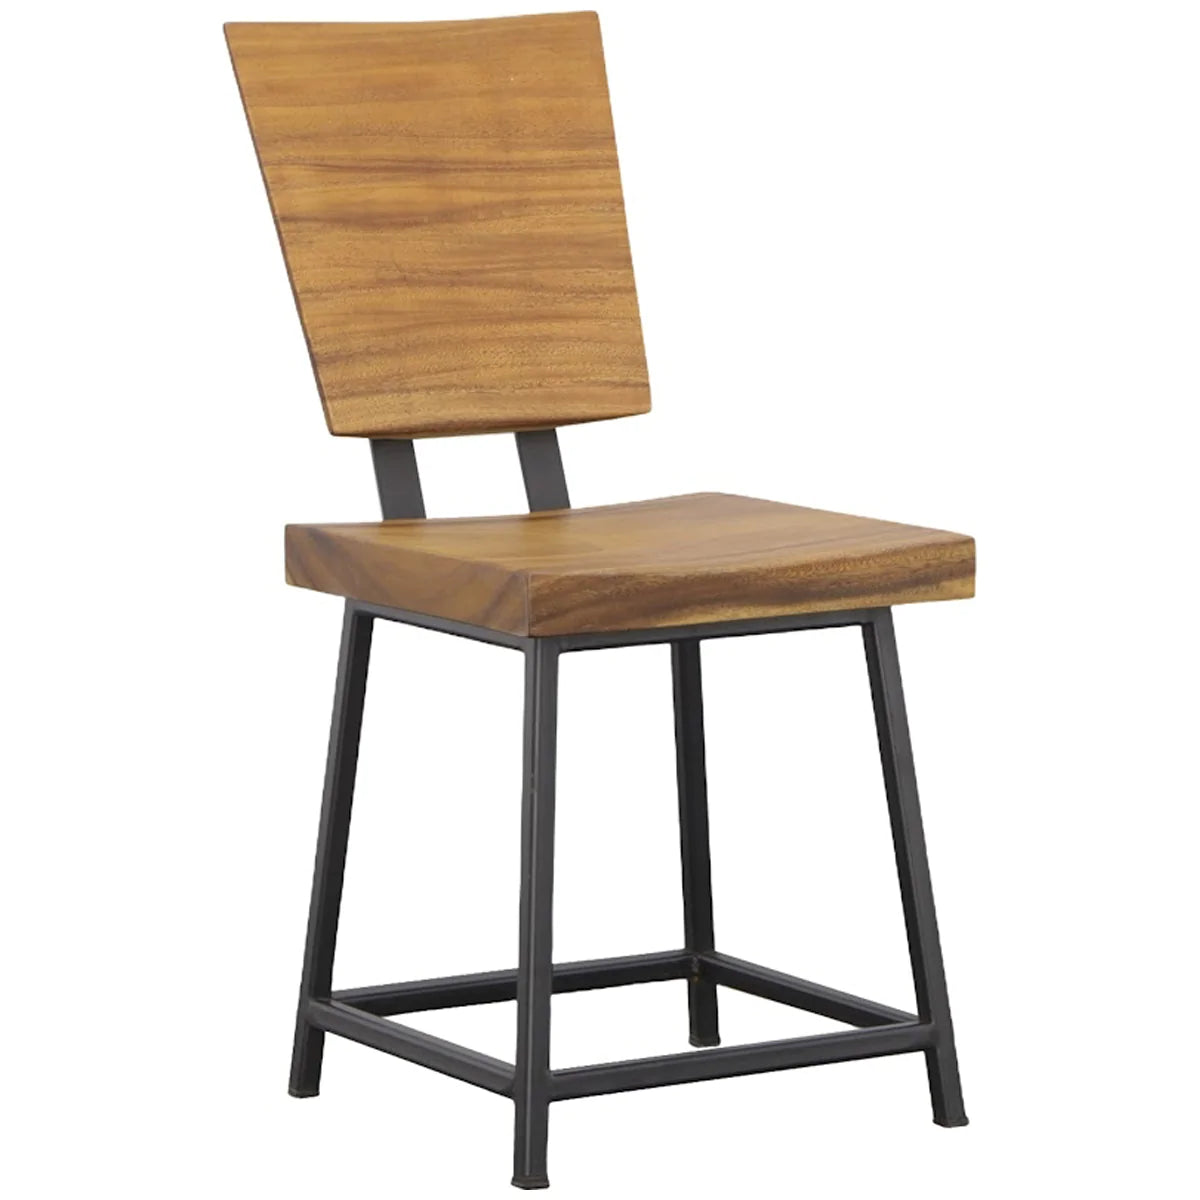 Phillips Collection Fundamental Dining Chair